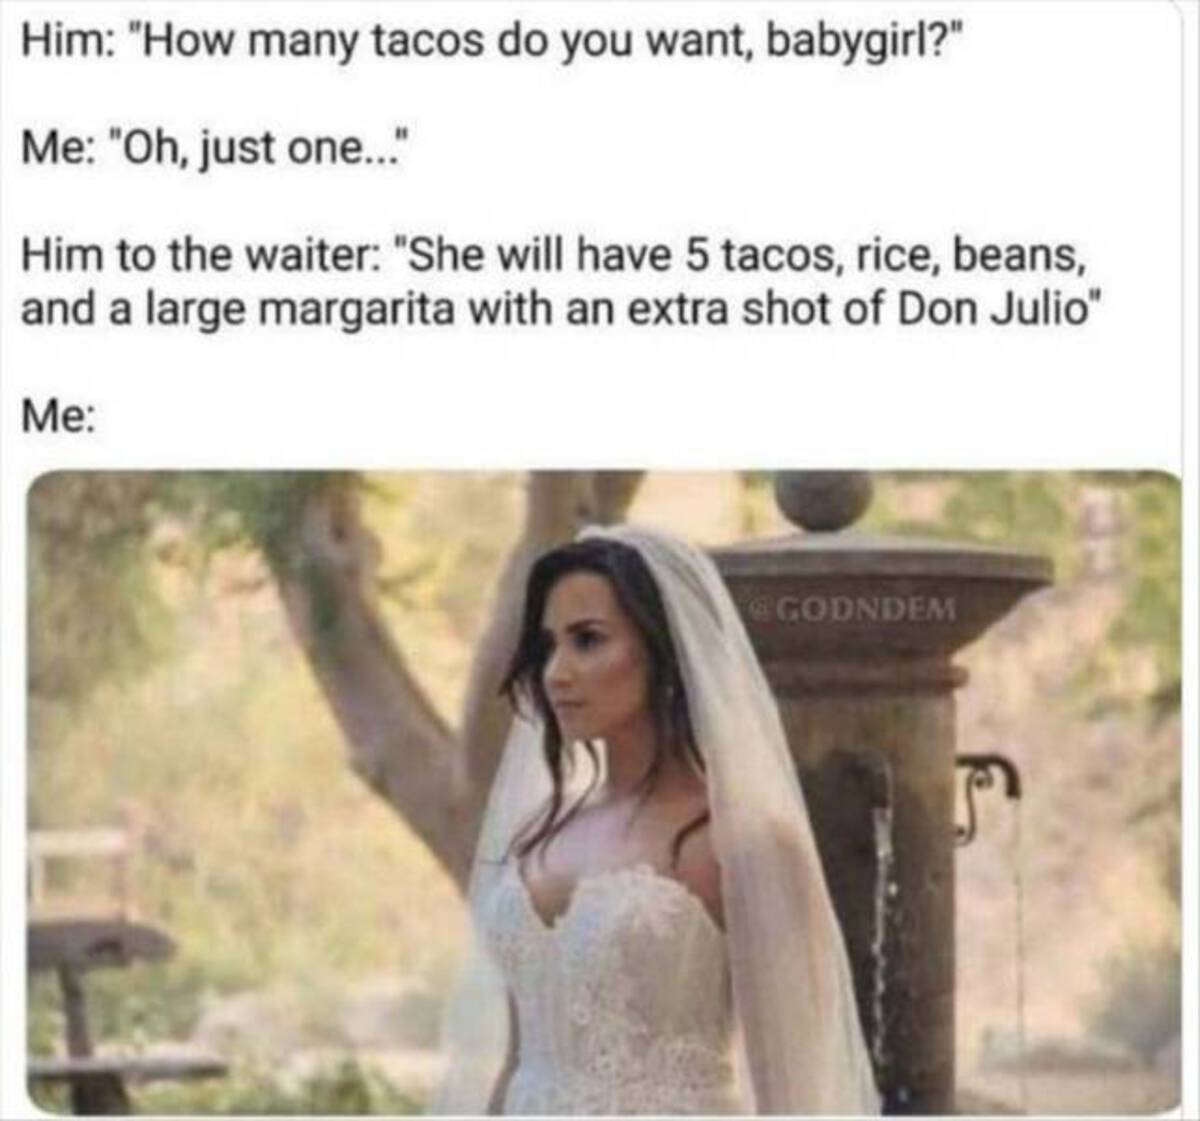 demi lovato wedding dress meme - Him "How many tacos do you want, babygirl?" Me "Oh, just one..." Him to the waiter "She will have 5 tacos, rice, beans, and a large margarita with an extra shot of Don Julio" Me Godndem